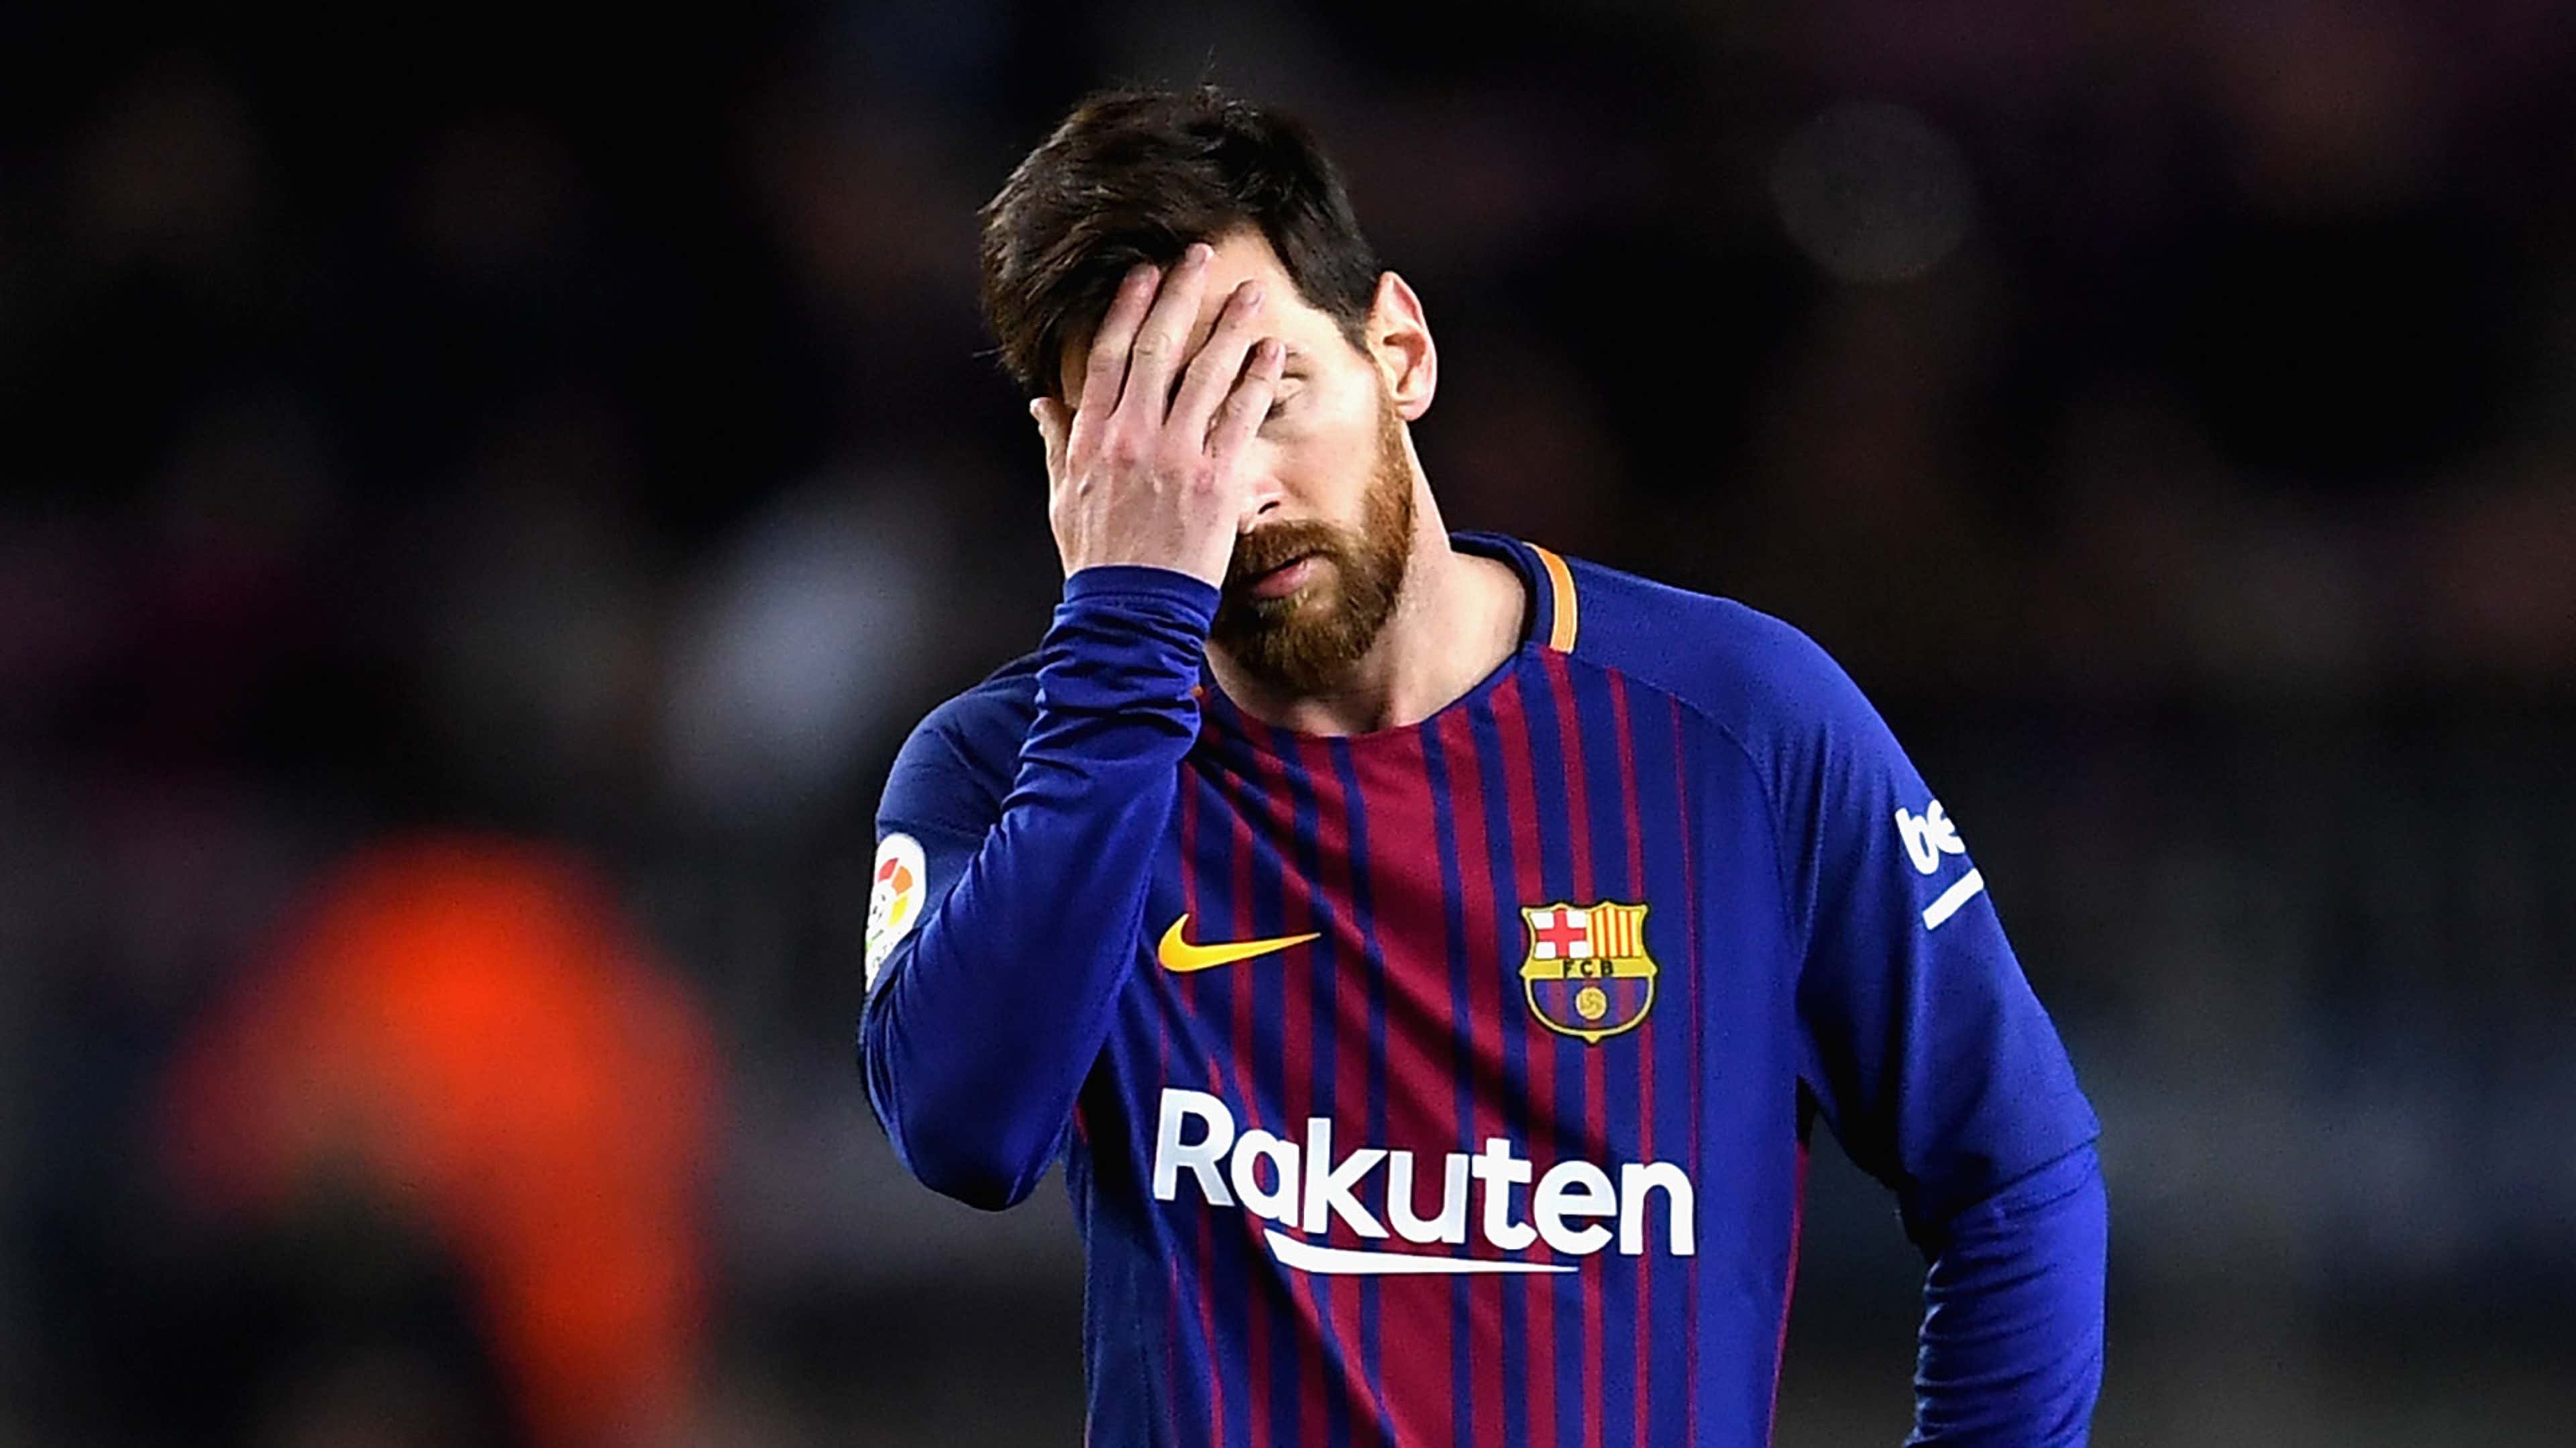 Barcelona news: The mystery of why Messi & Co. are haemorrhaging fans ...